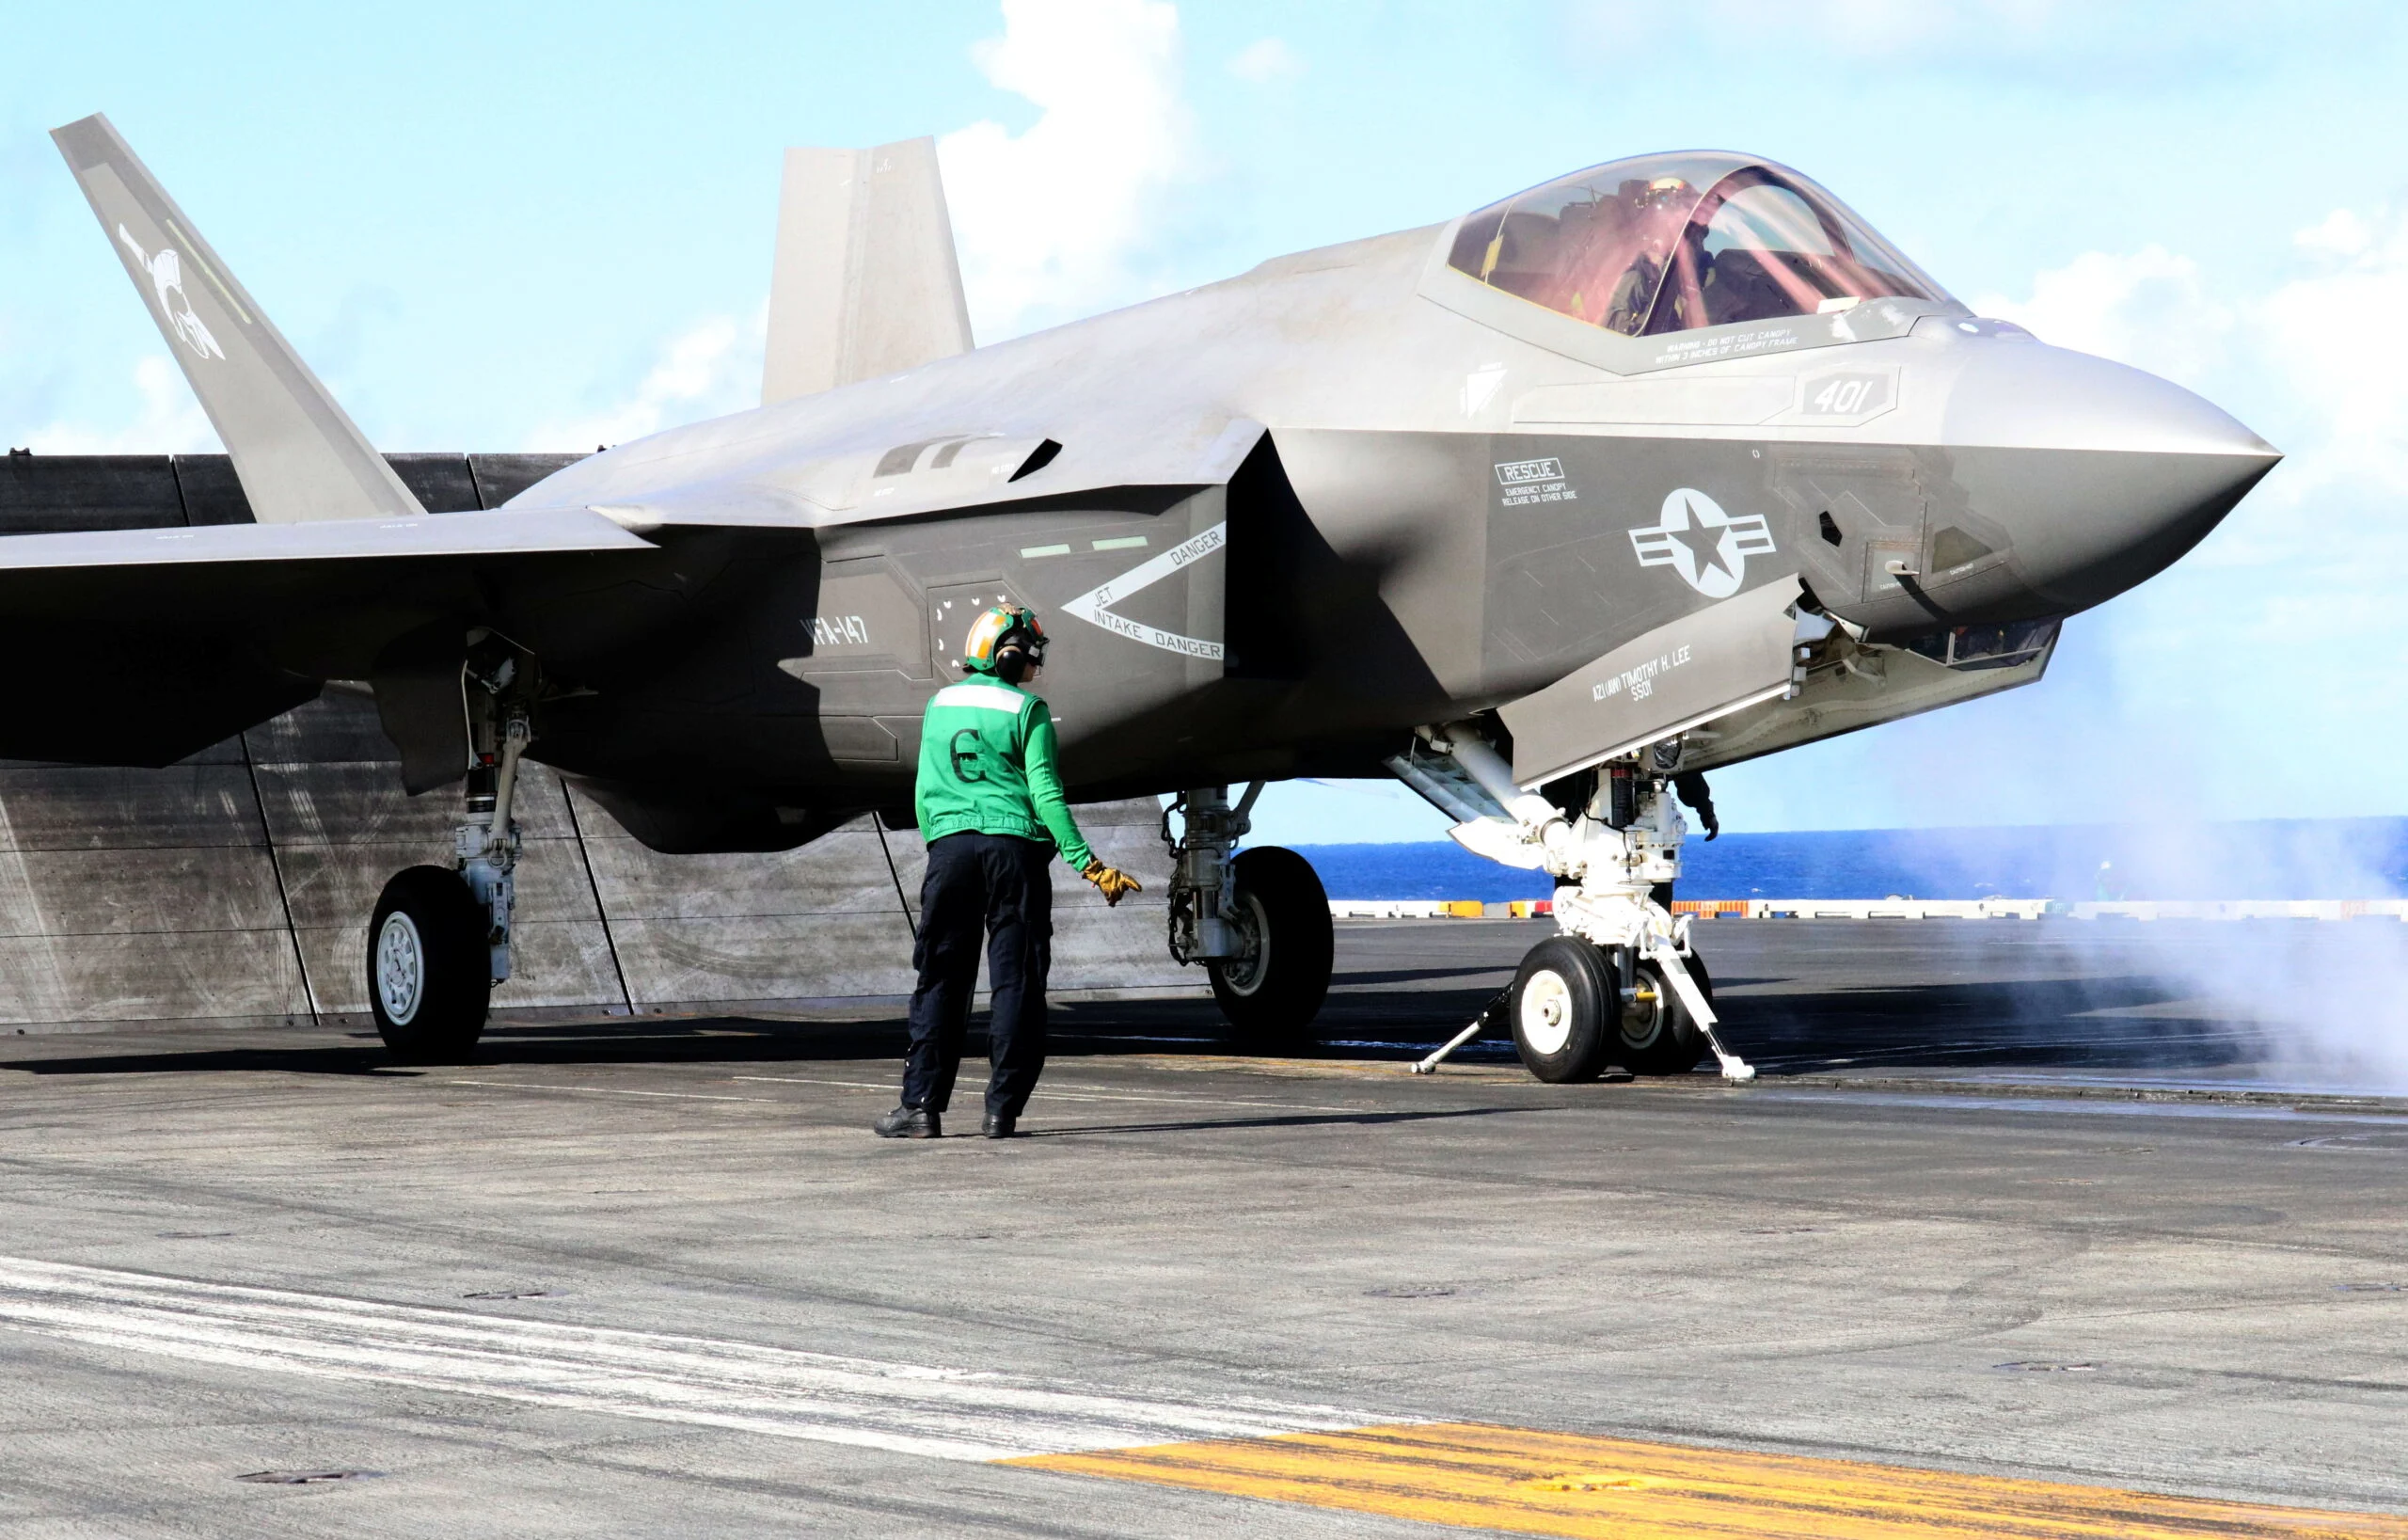 F 35c Prepares To Catapult From The Deck Of The Uss Carl Vinson In The Western Pacific, South Of Japan